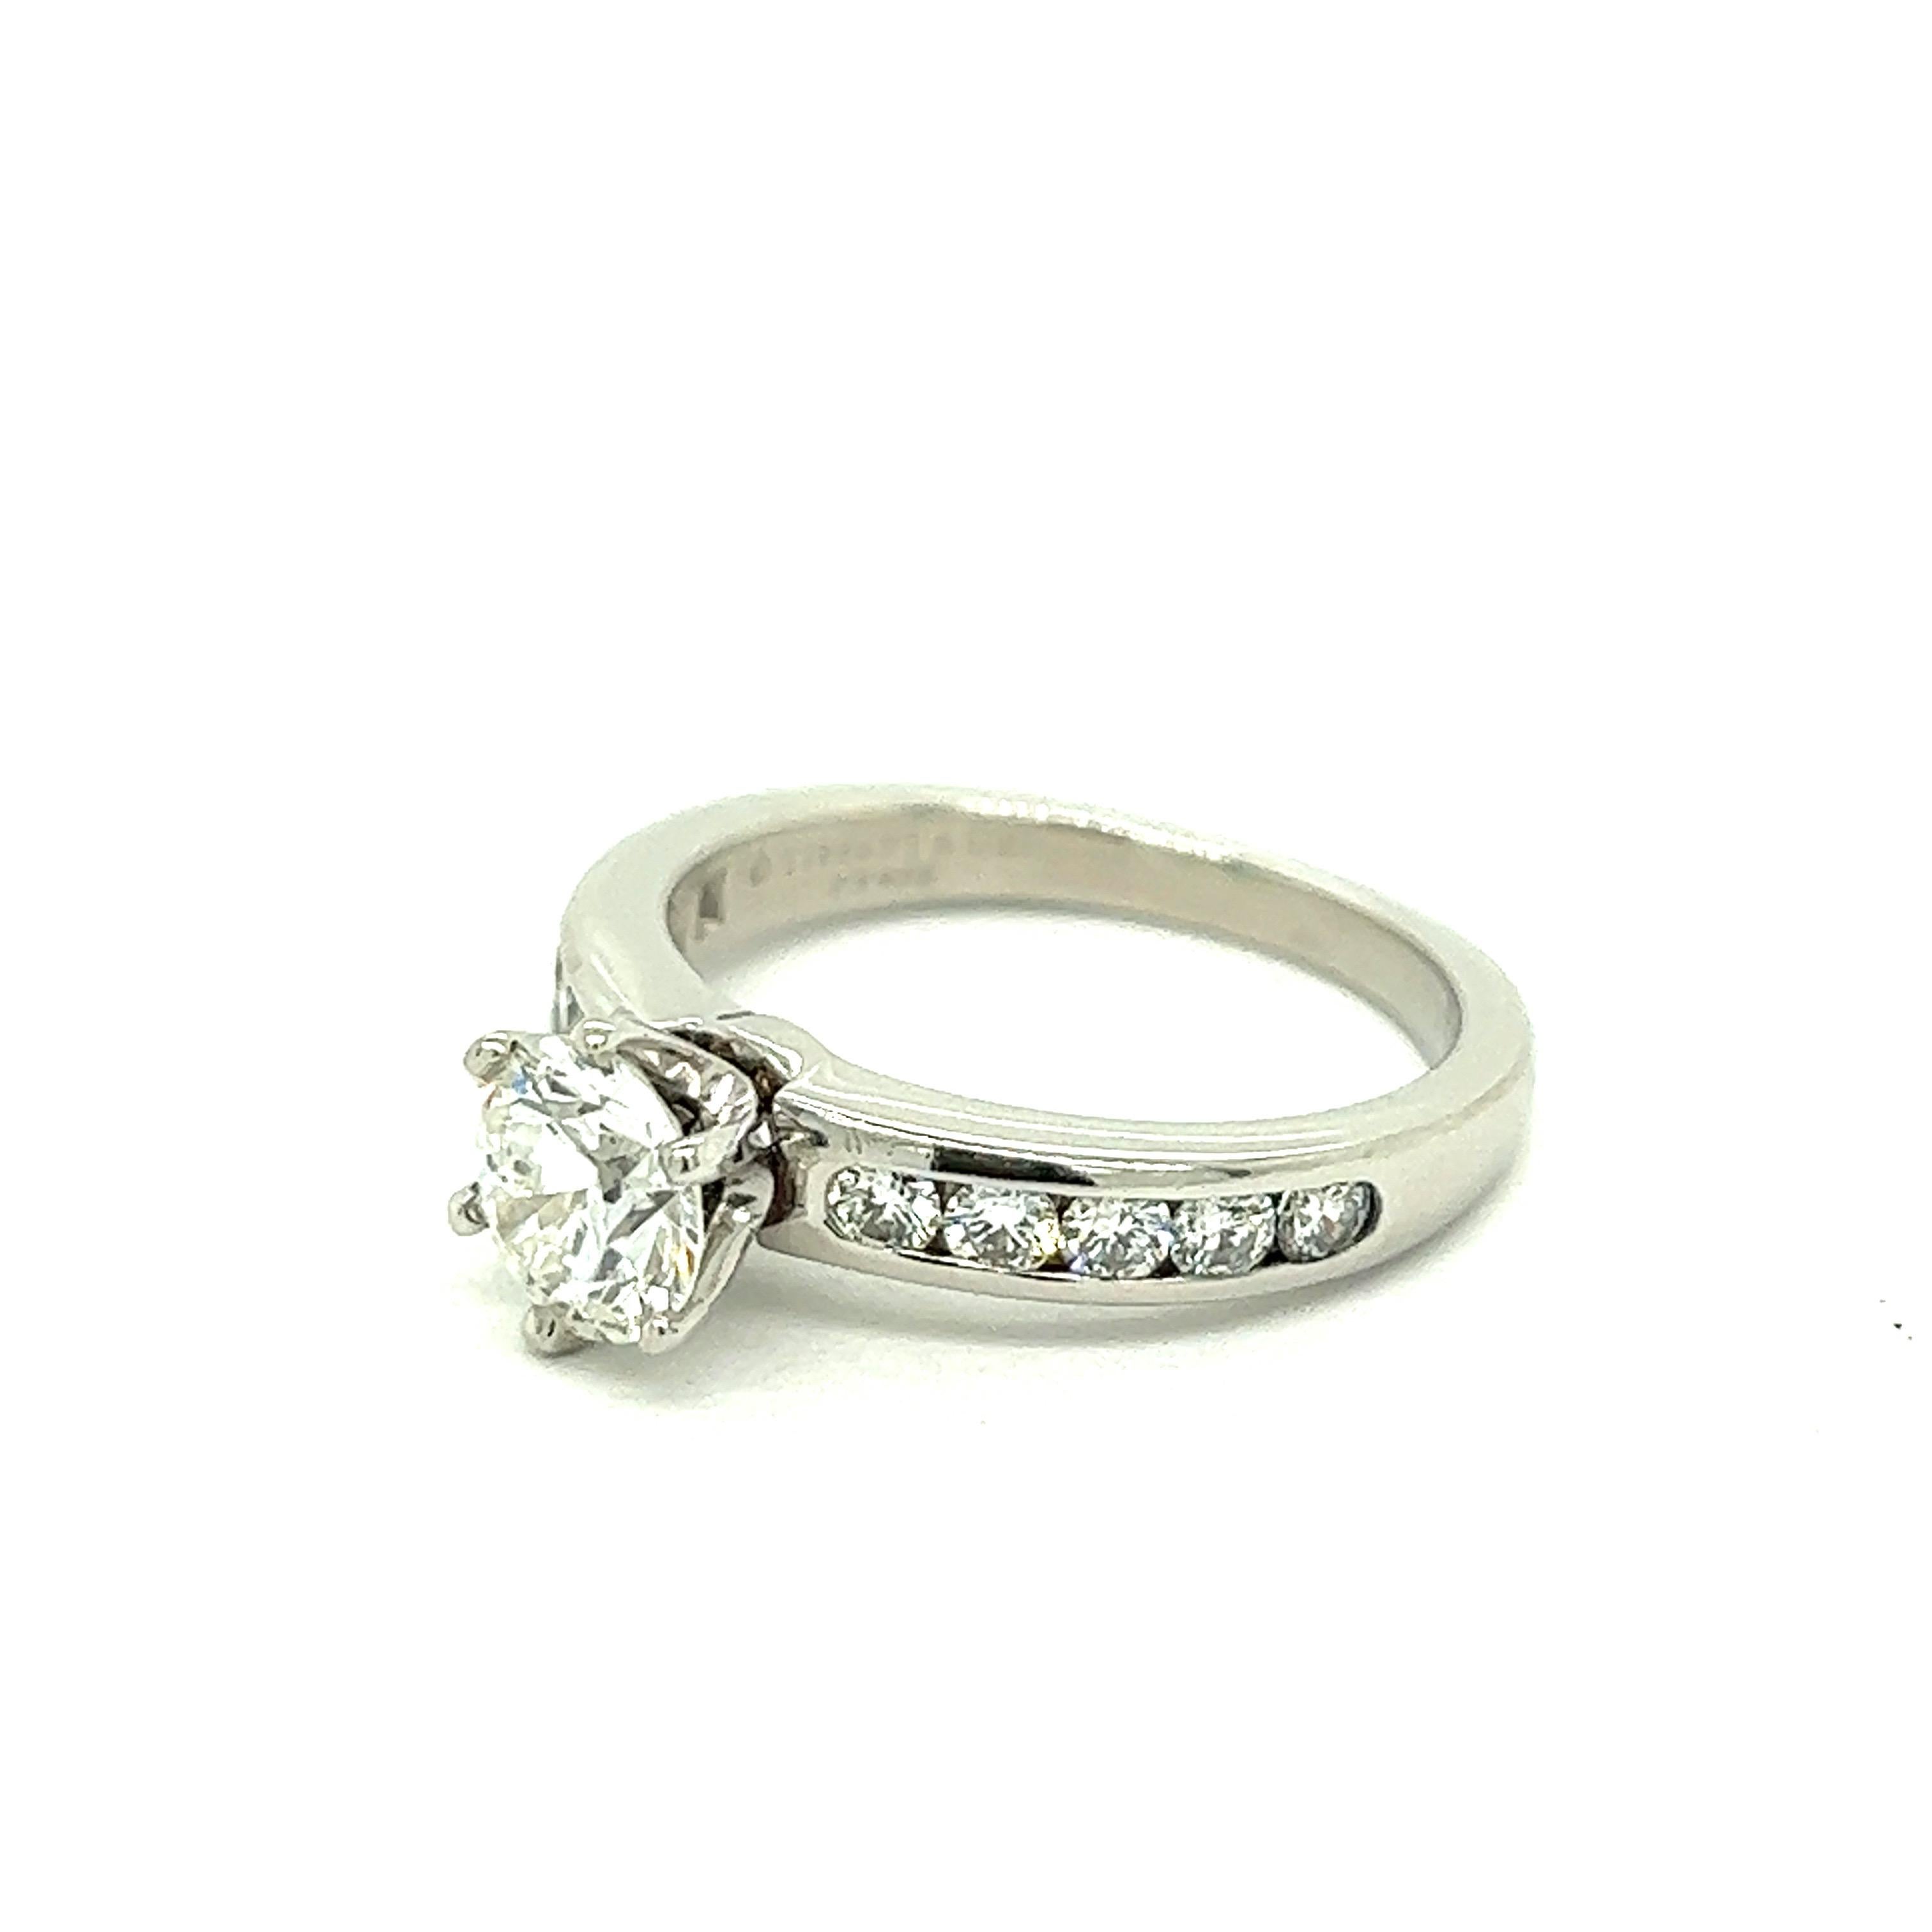 Tiffany & Co. 0.77 Carat Diamond Solitaire Engagement Ring For Sale 3